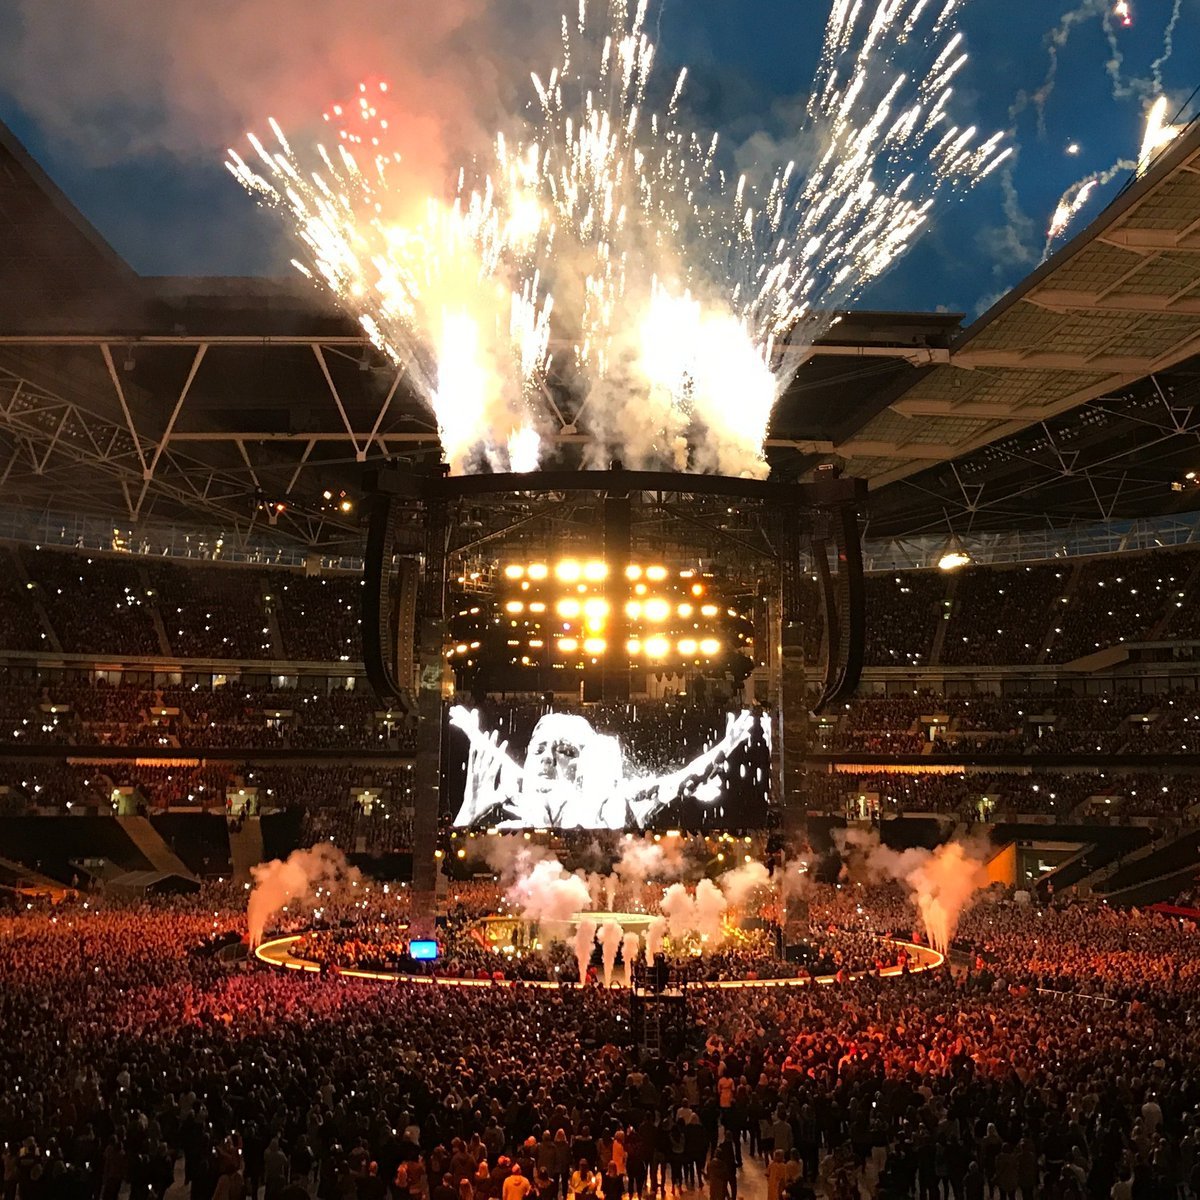 6 years ago today, @Adele's The Finale smashed Wembley Stadium's attendance record, with 98,000 people in a night, breaking the existing record of 92,000 set by U2’s 360° tour in 2009.